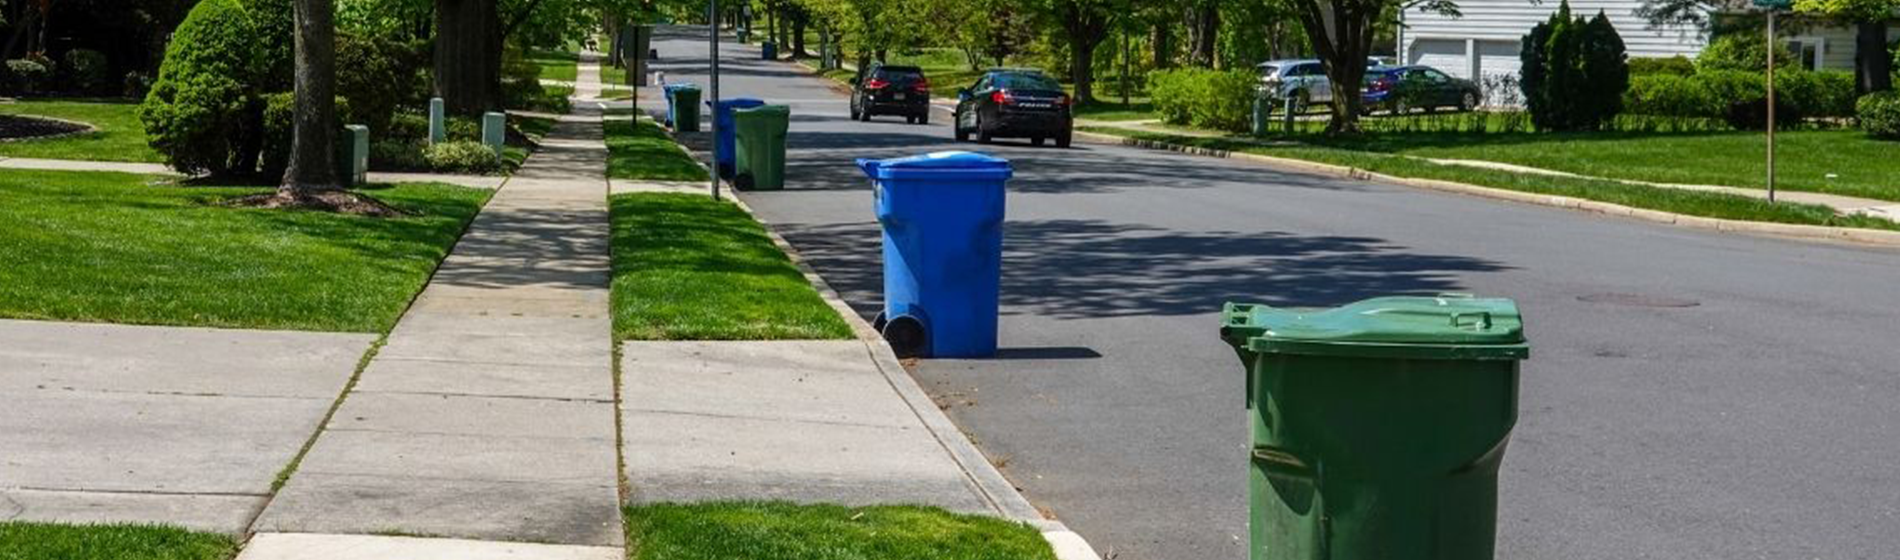 Municipal waste and bulk collection. What are the benefits?